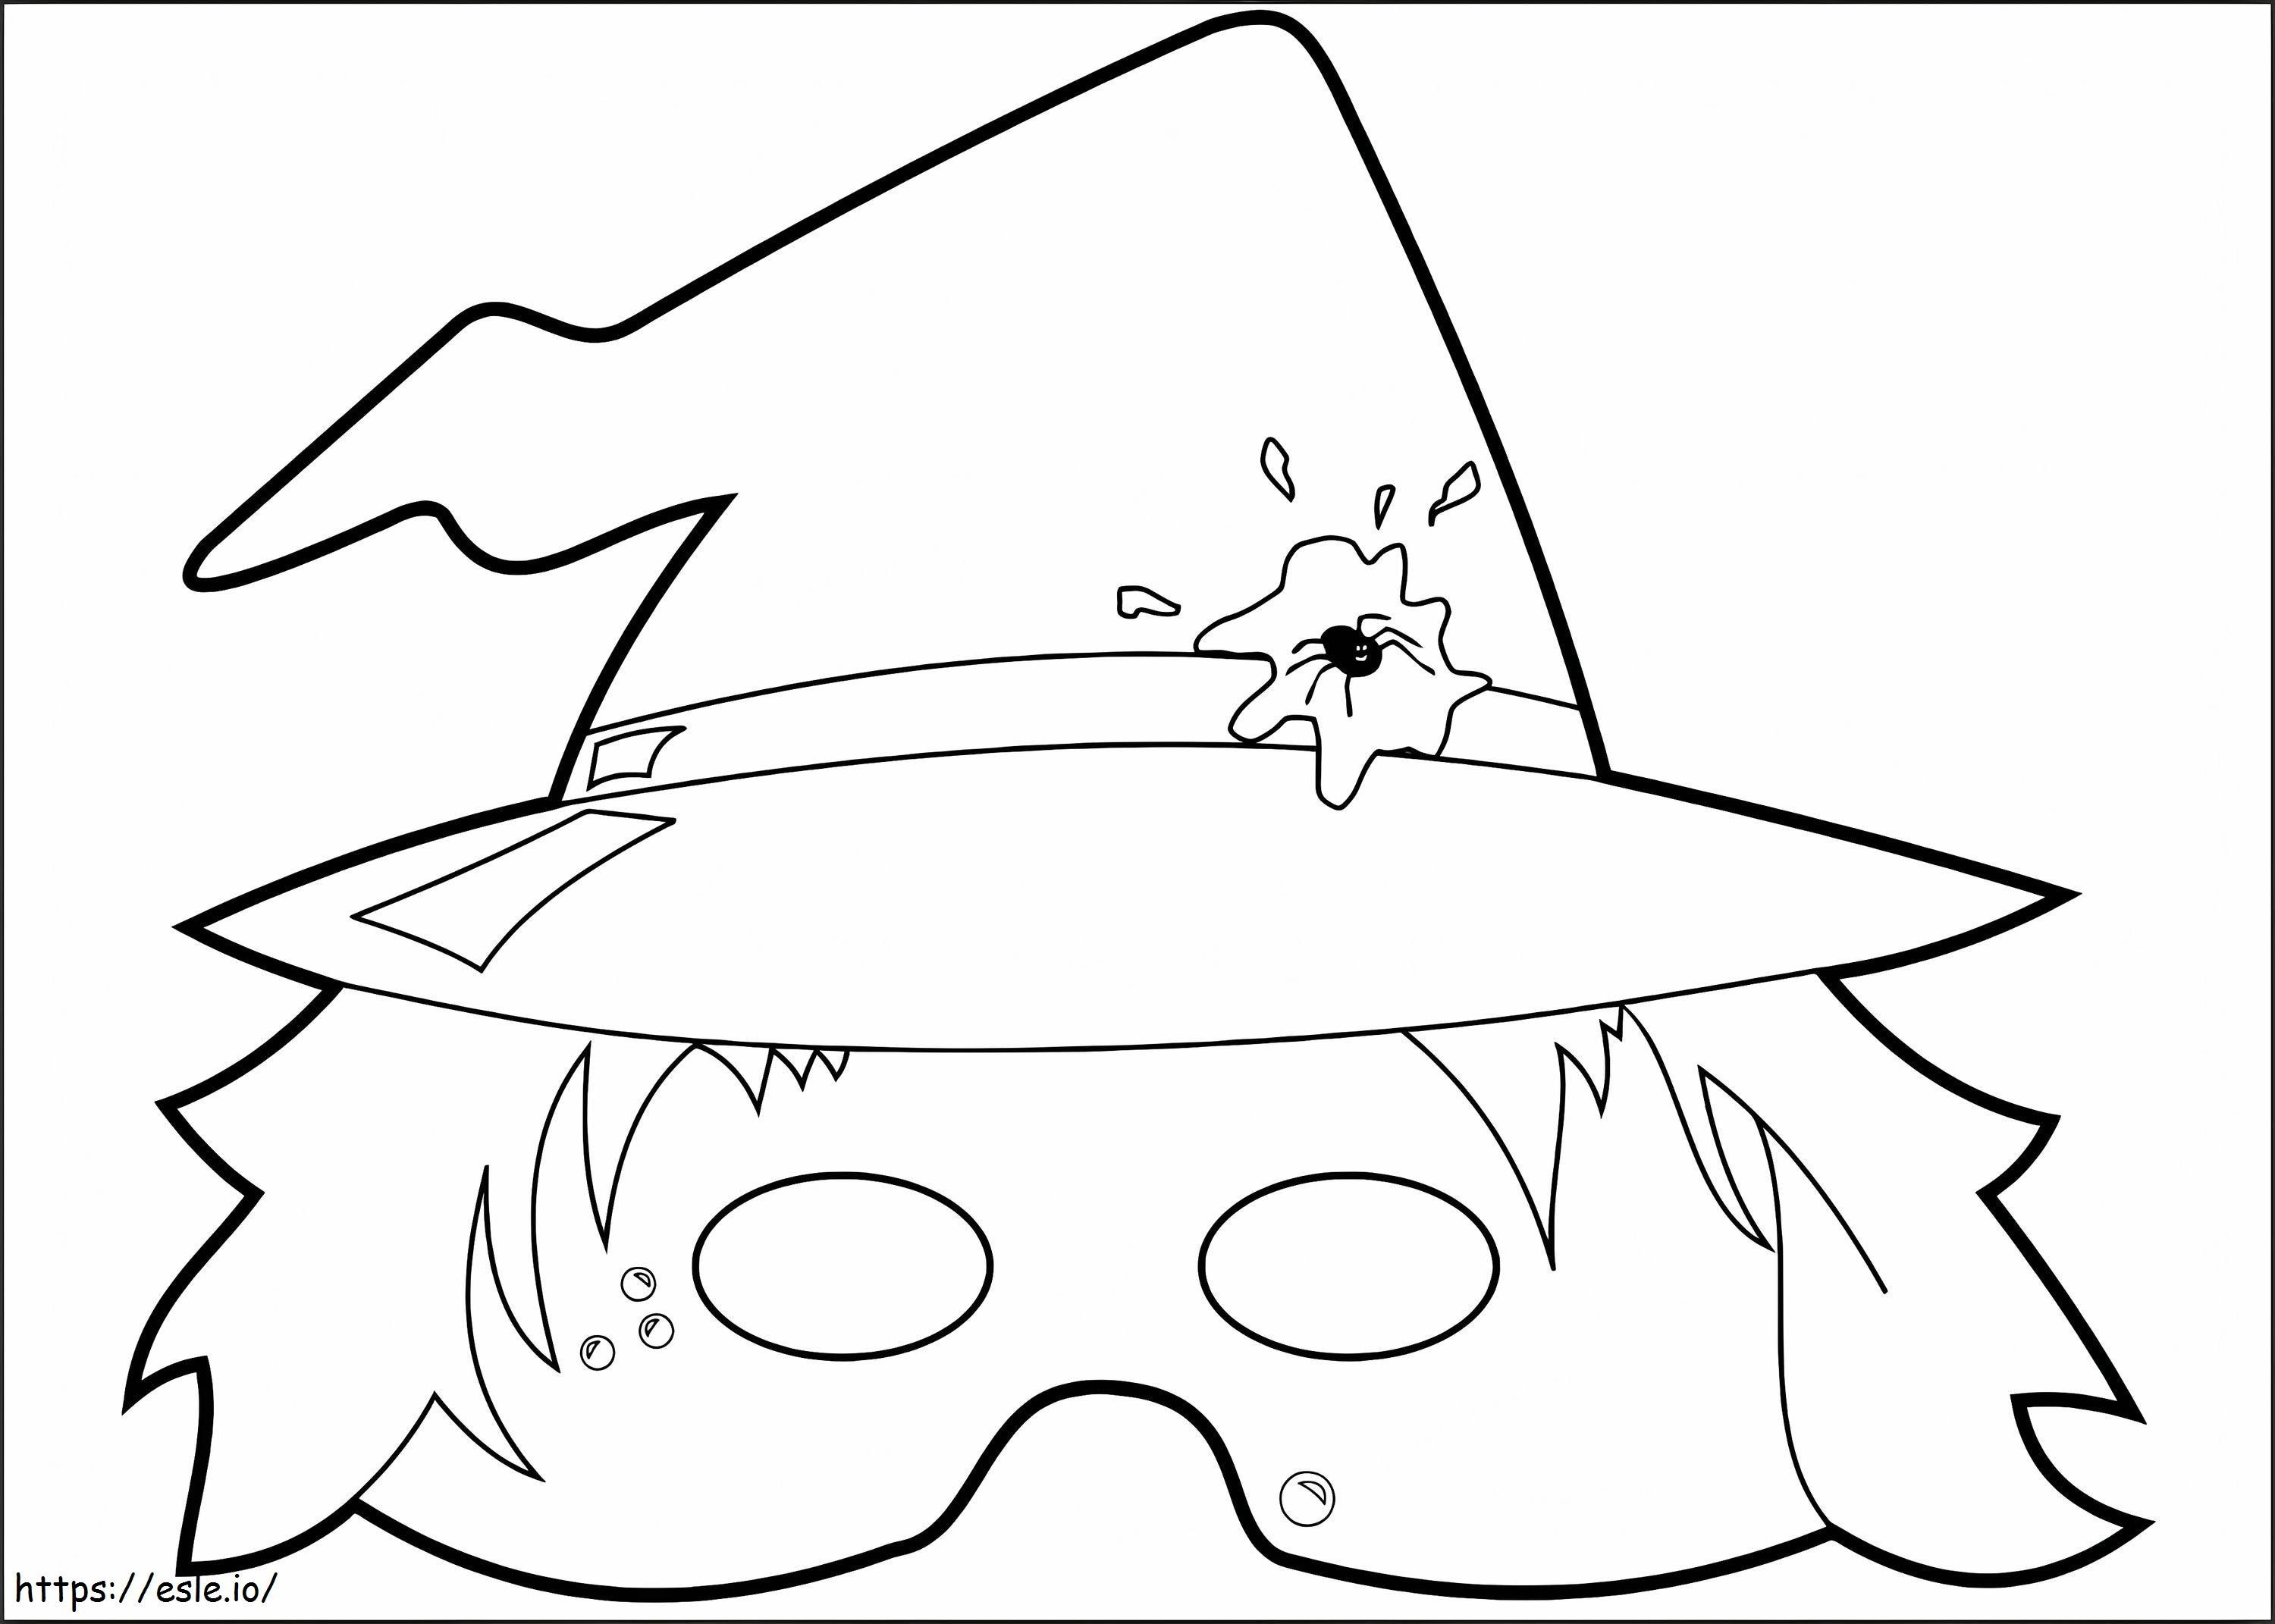 Wizard Mask coloring page